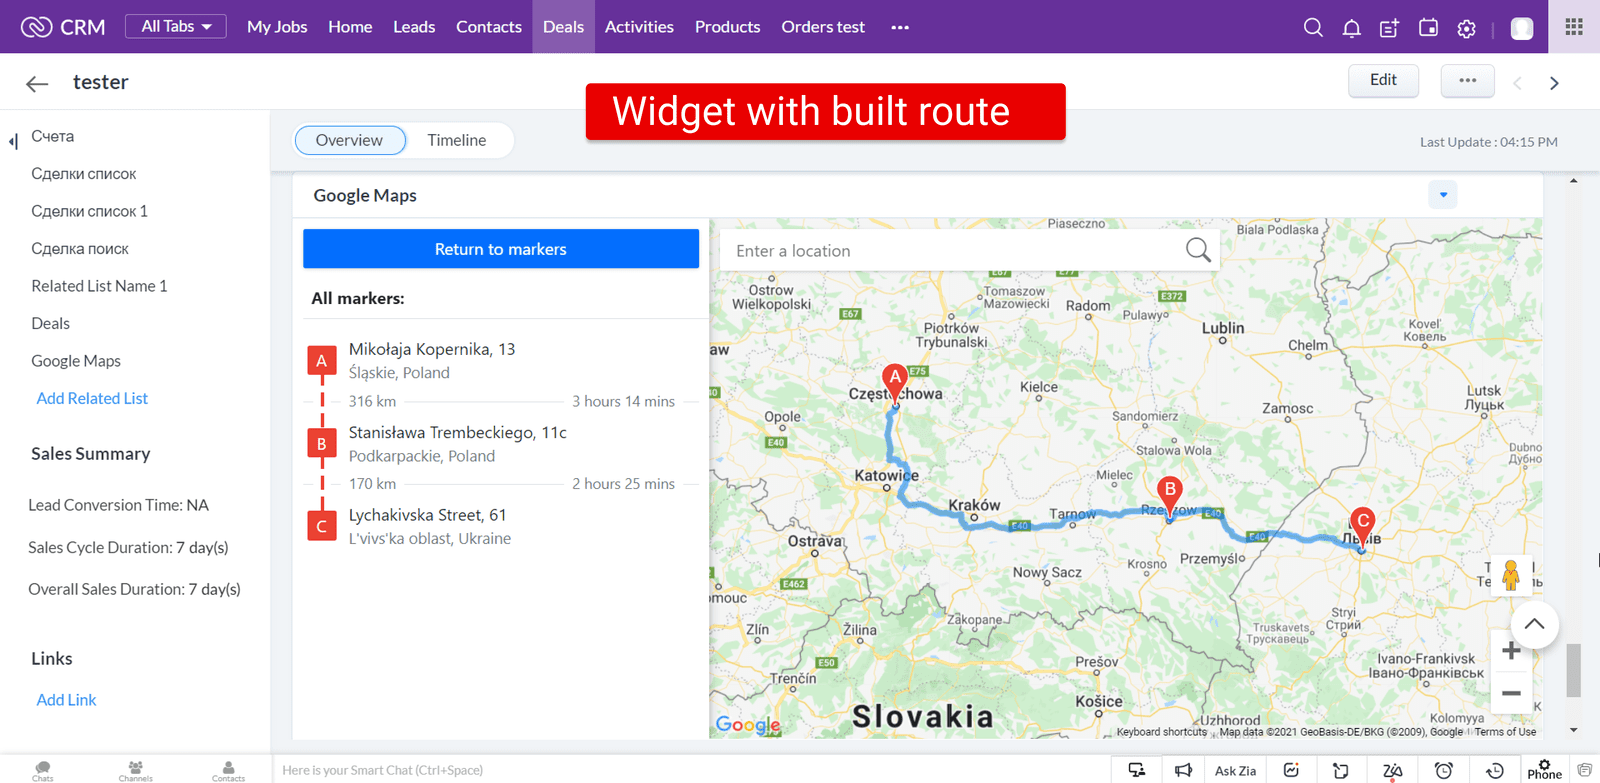 How to build a route?